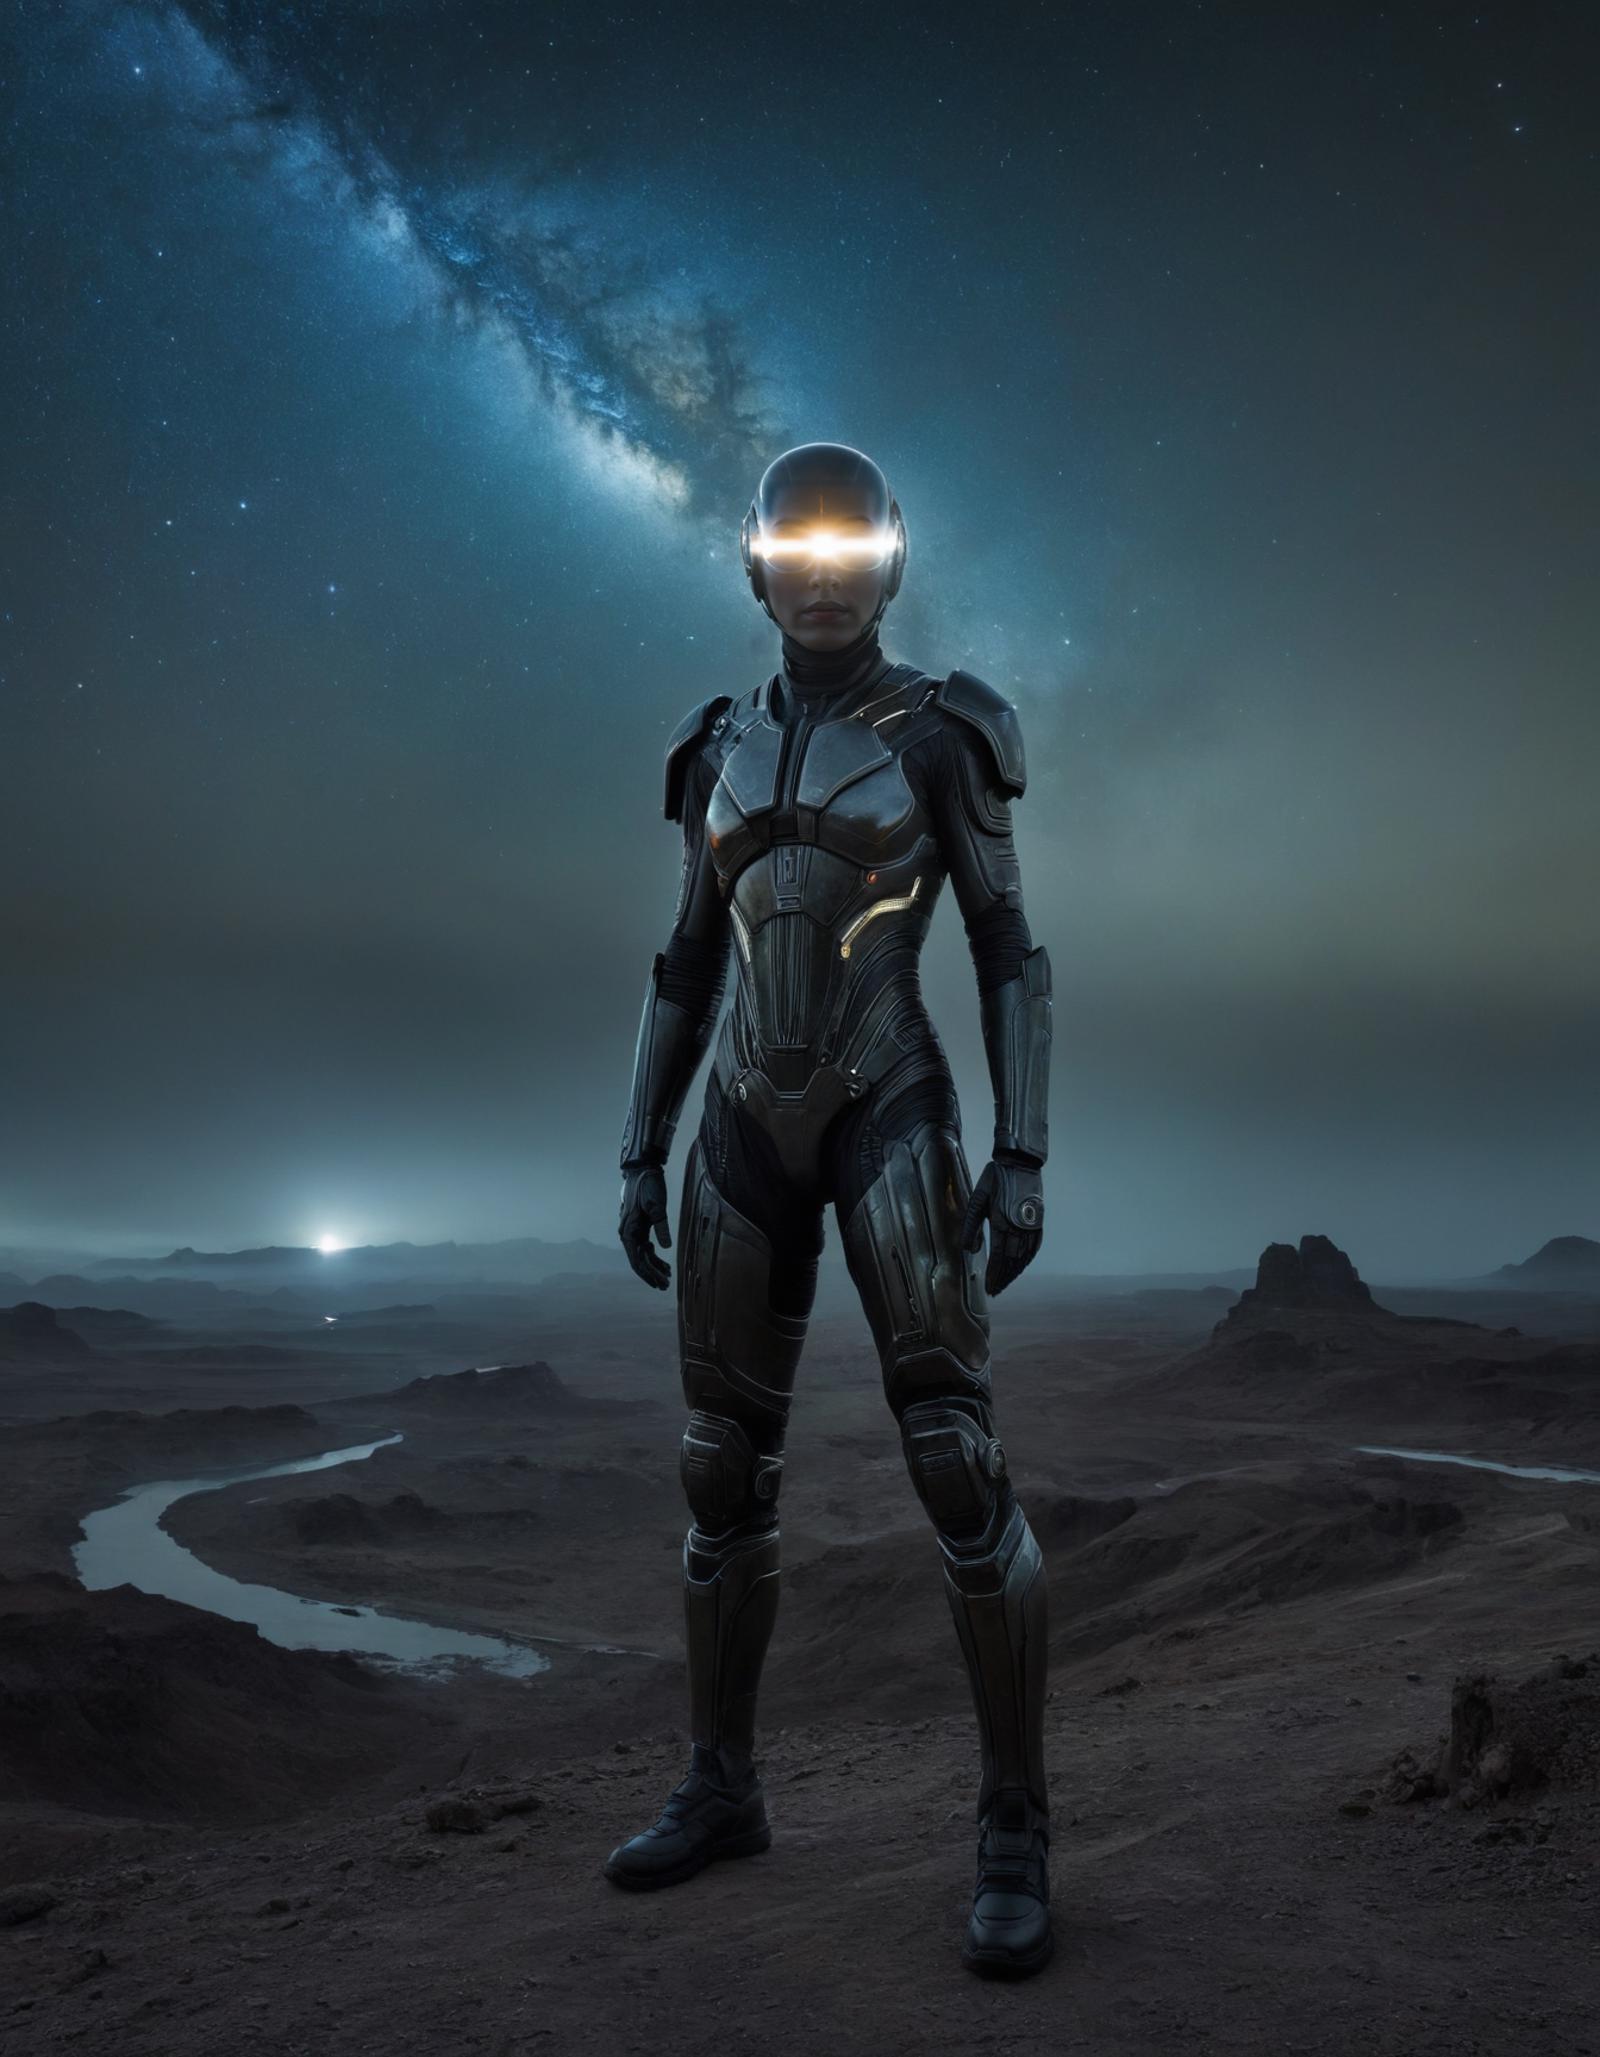 A robotic figure stands against a starry night sky.